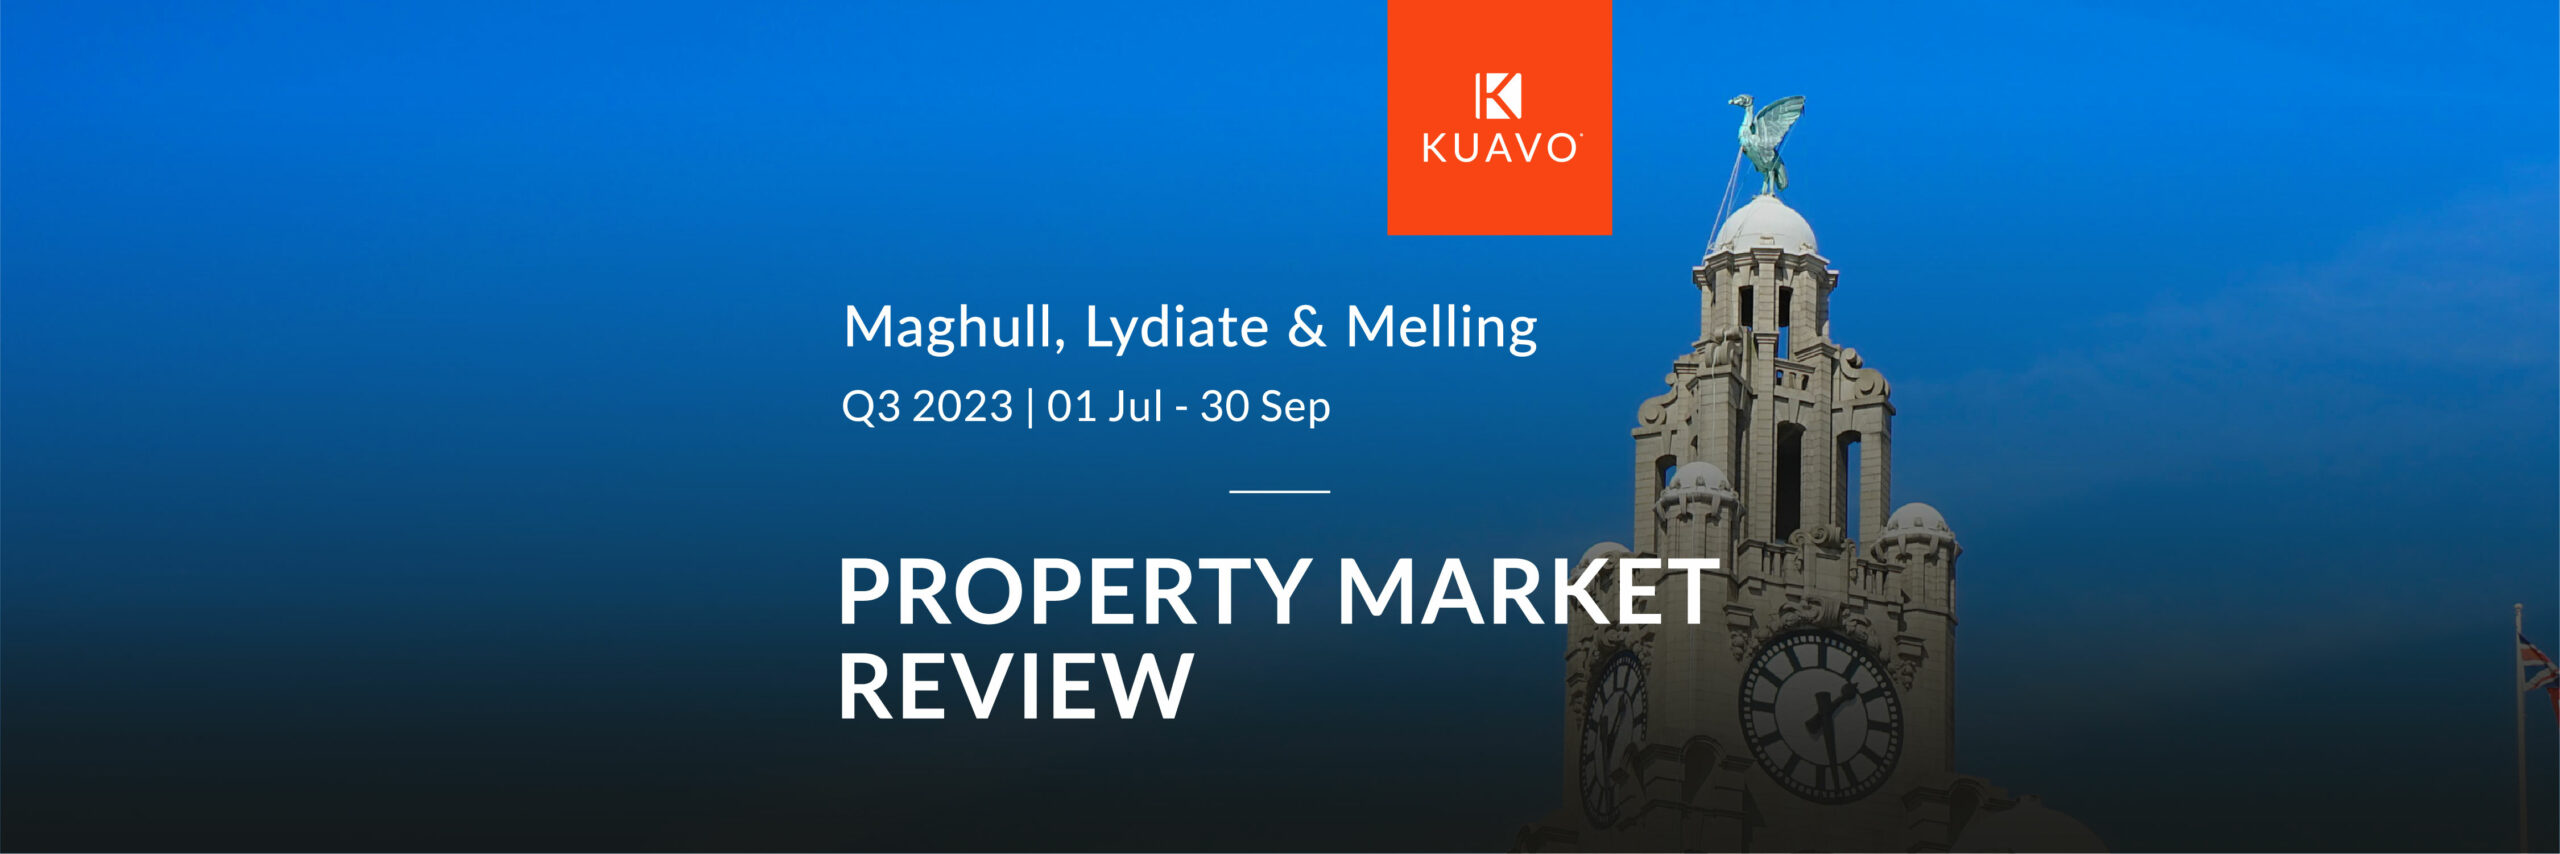 Maghull, Lydiate & Melling | Property Market Review | Q3 2023